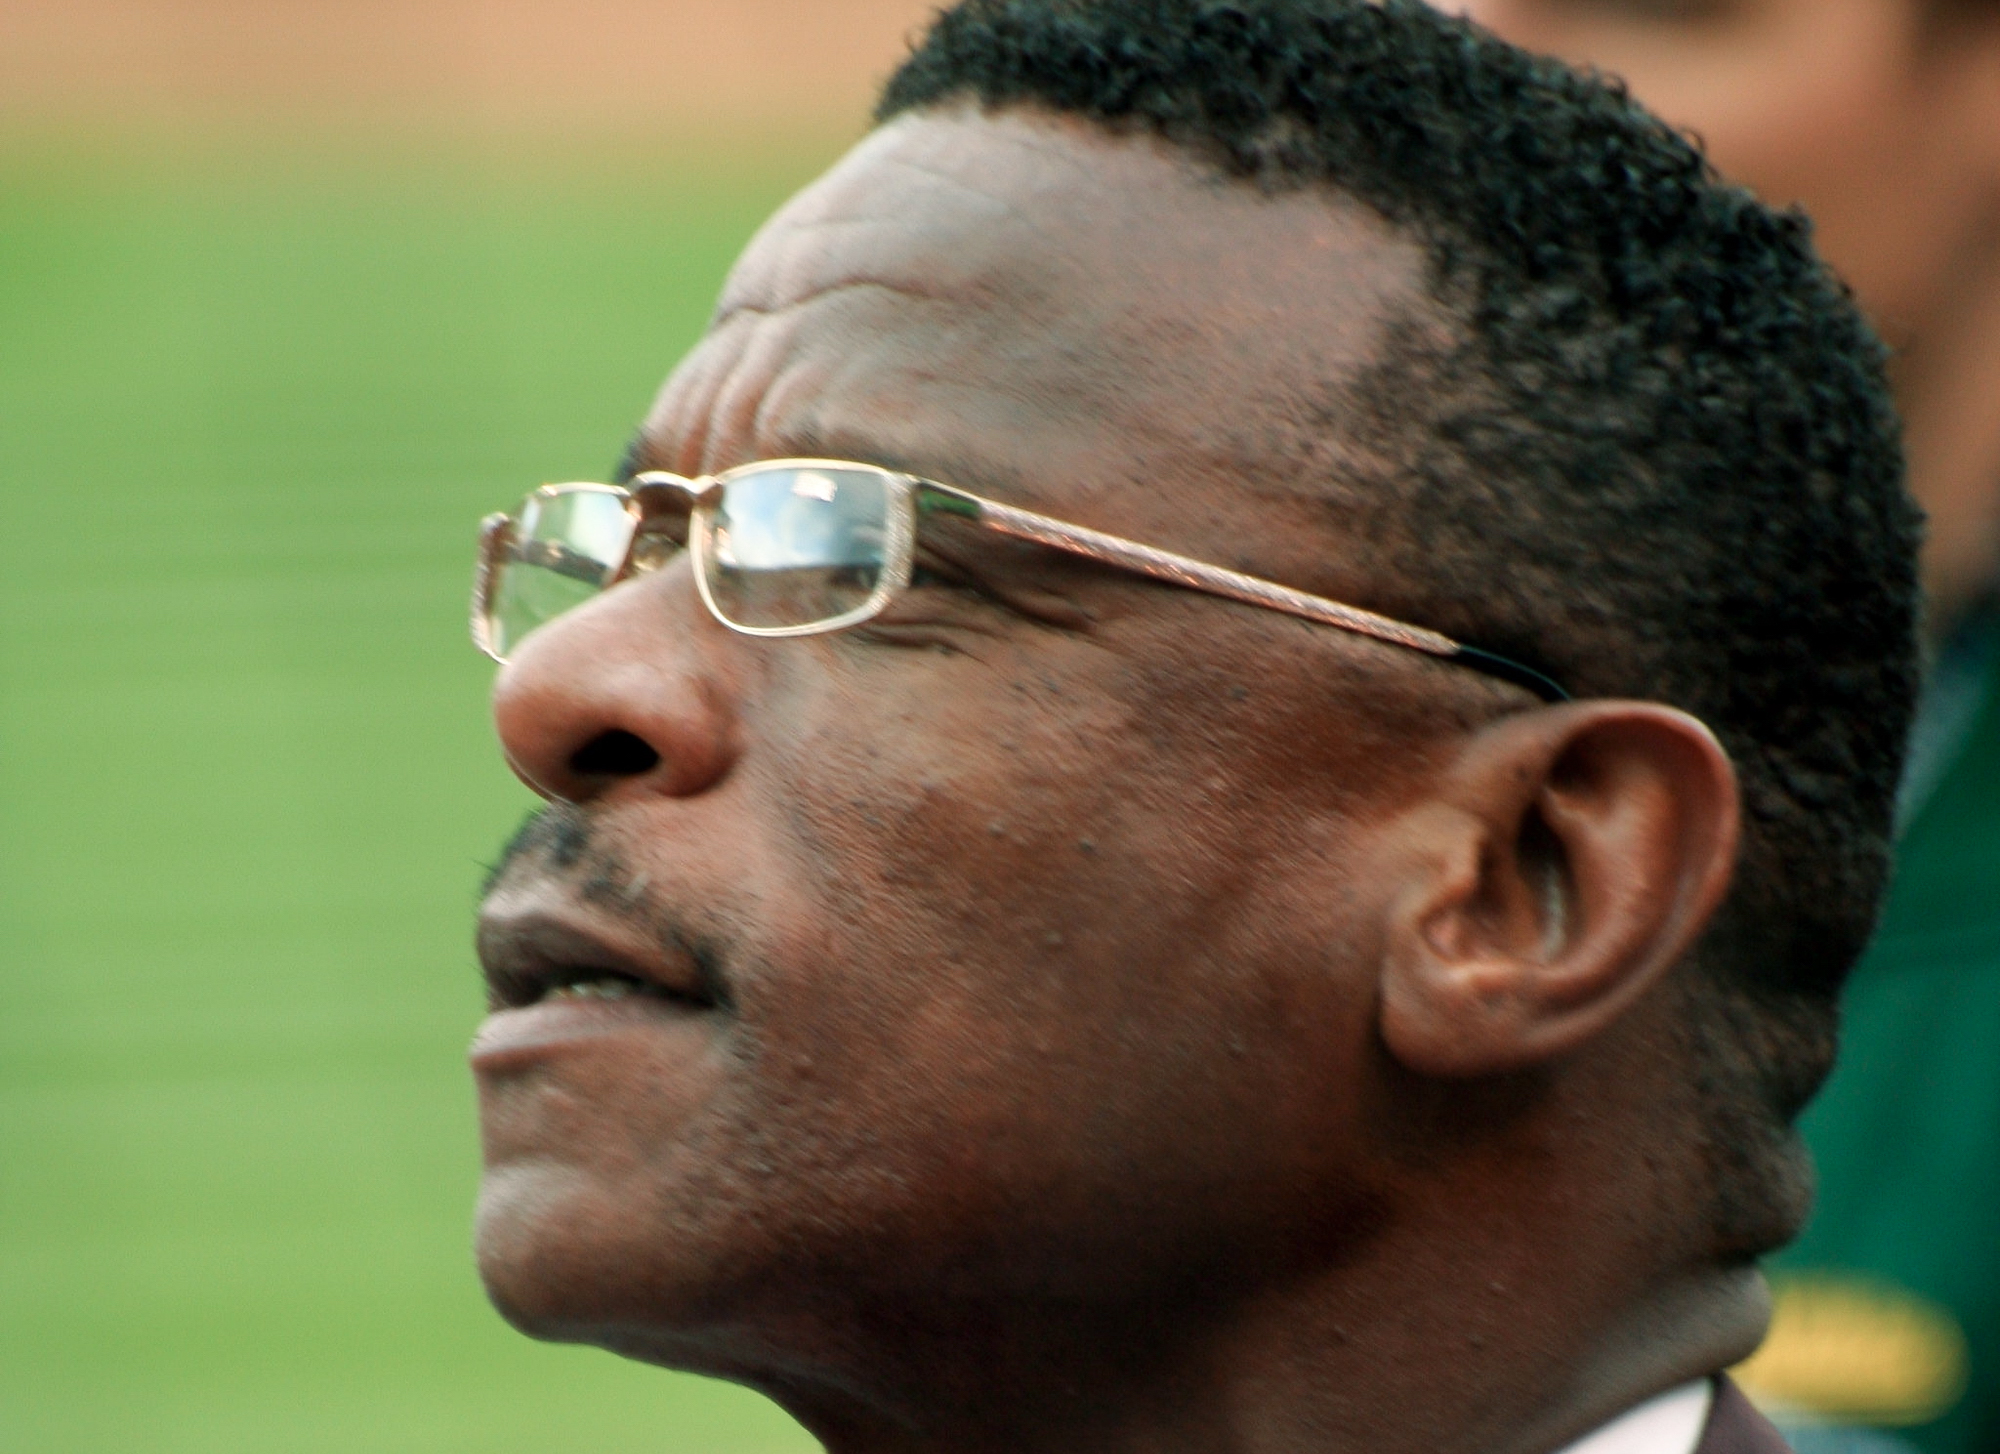 Rickey Henderson looking out to the crowd at the conclusion of the number retirement ceremony. Photo credit: Rickey Henderson, John Morgan